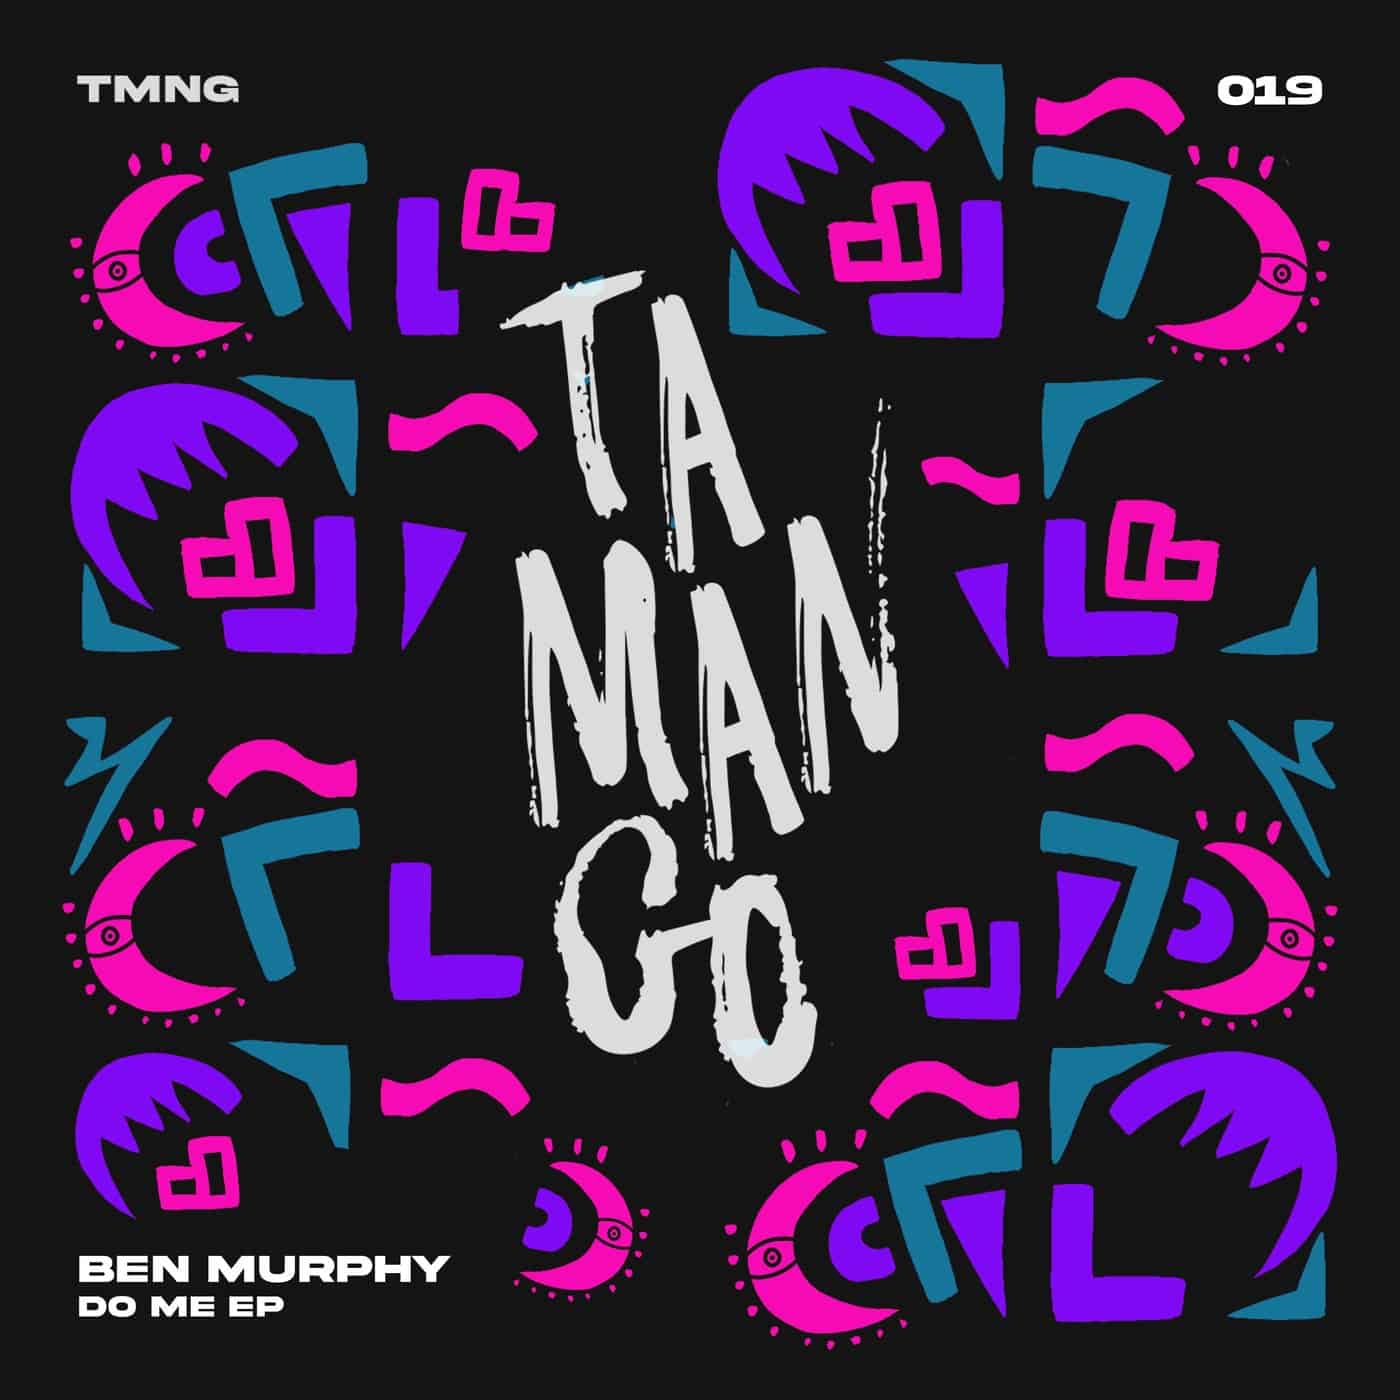 image cover: Ben Murphy - Do Me EP / TMNG019